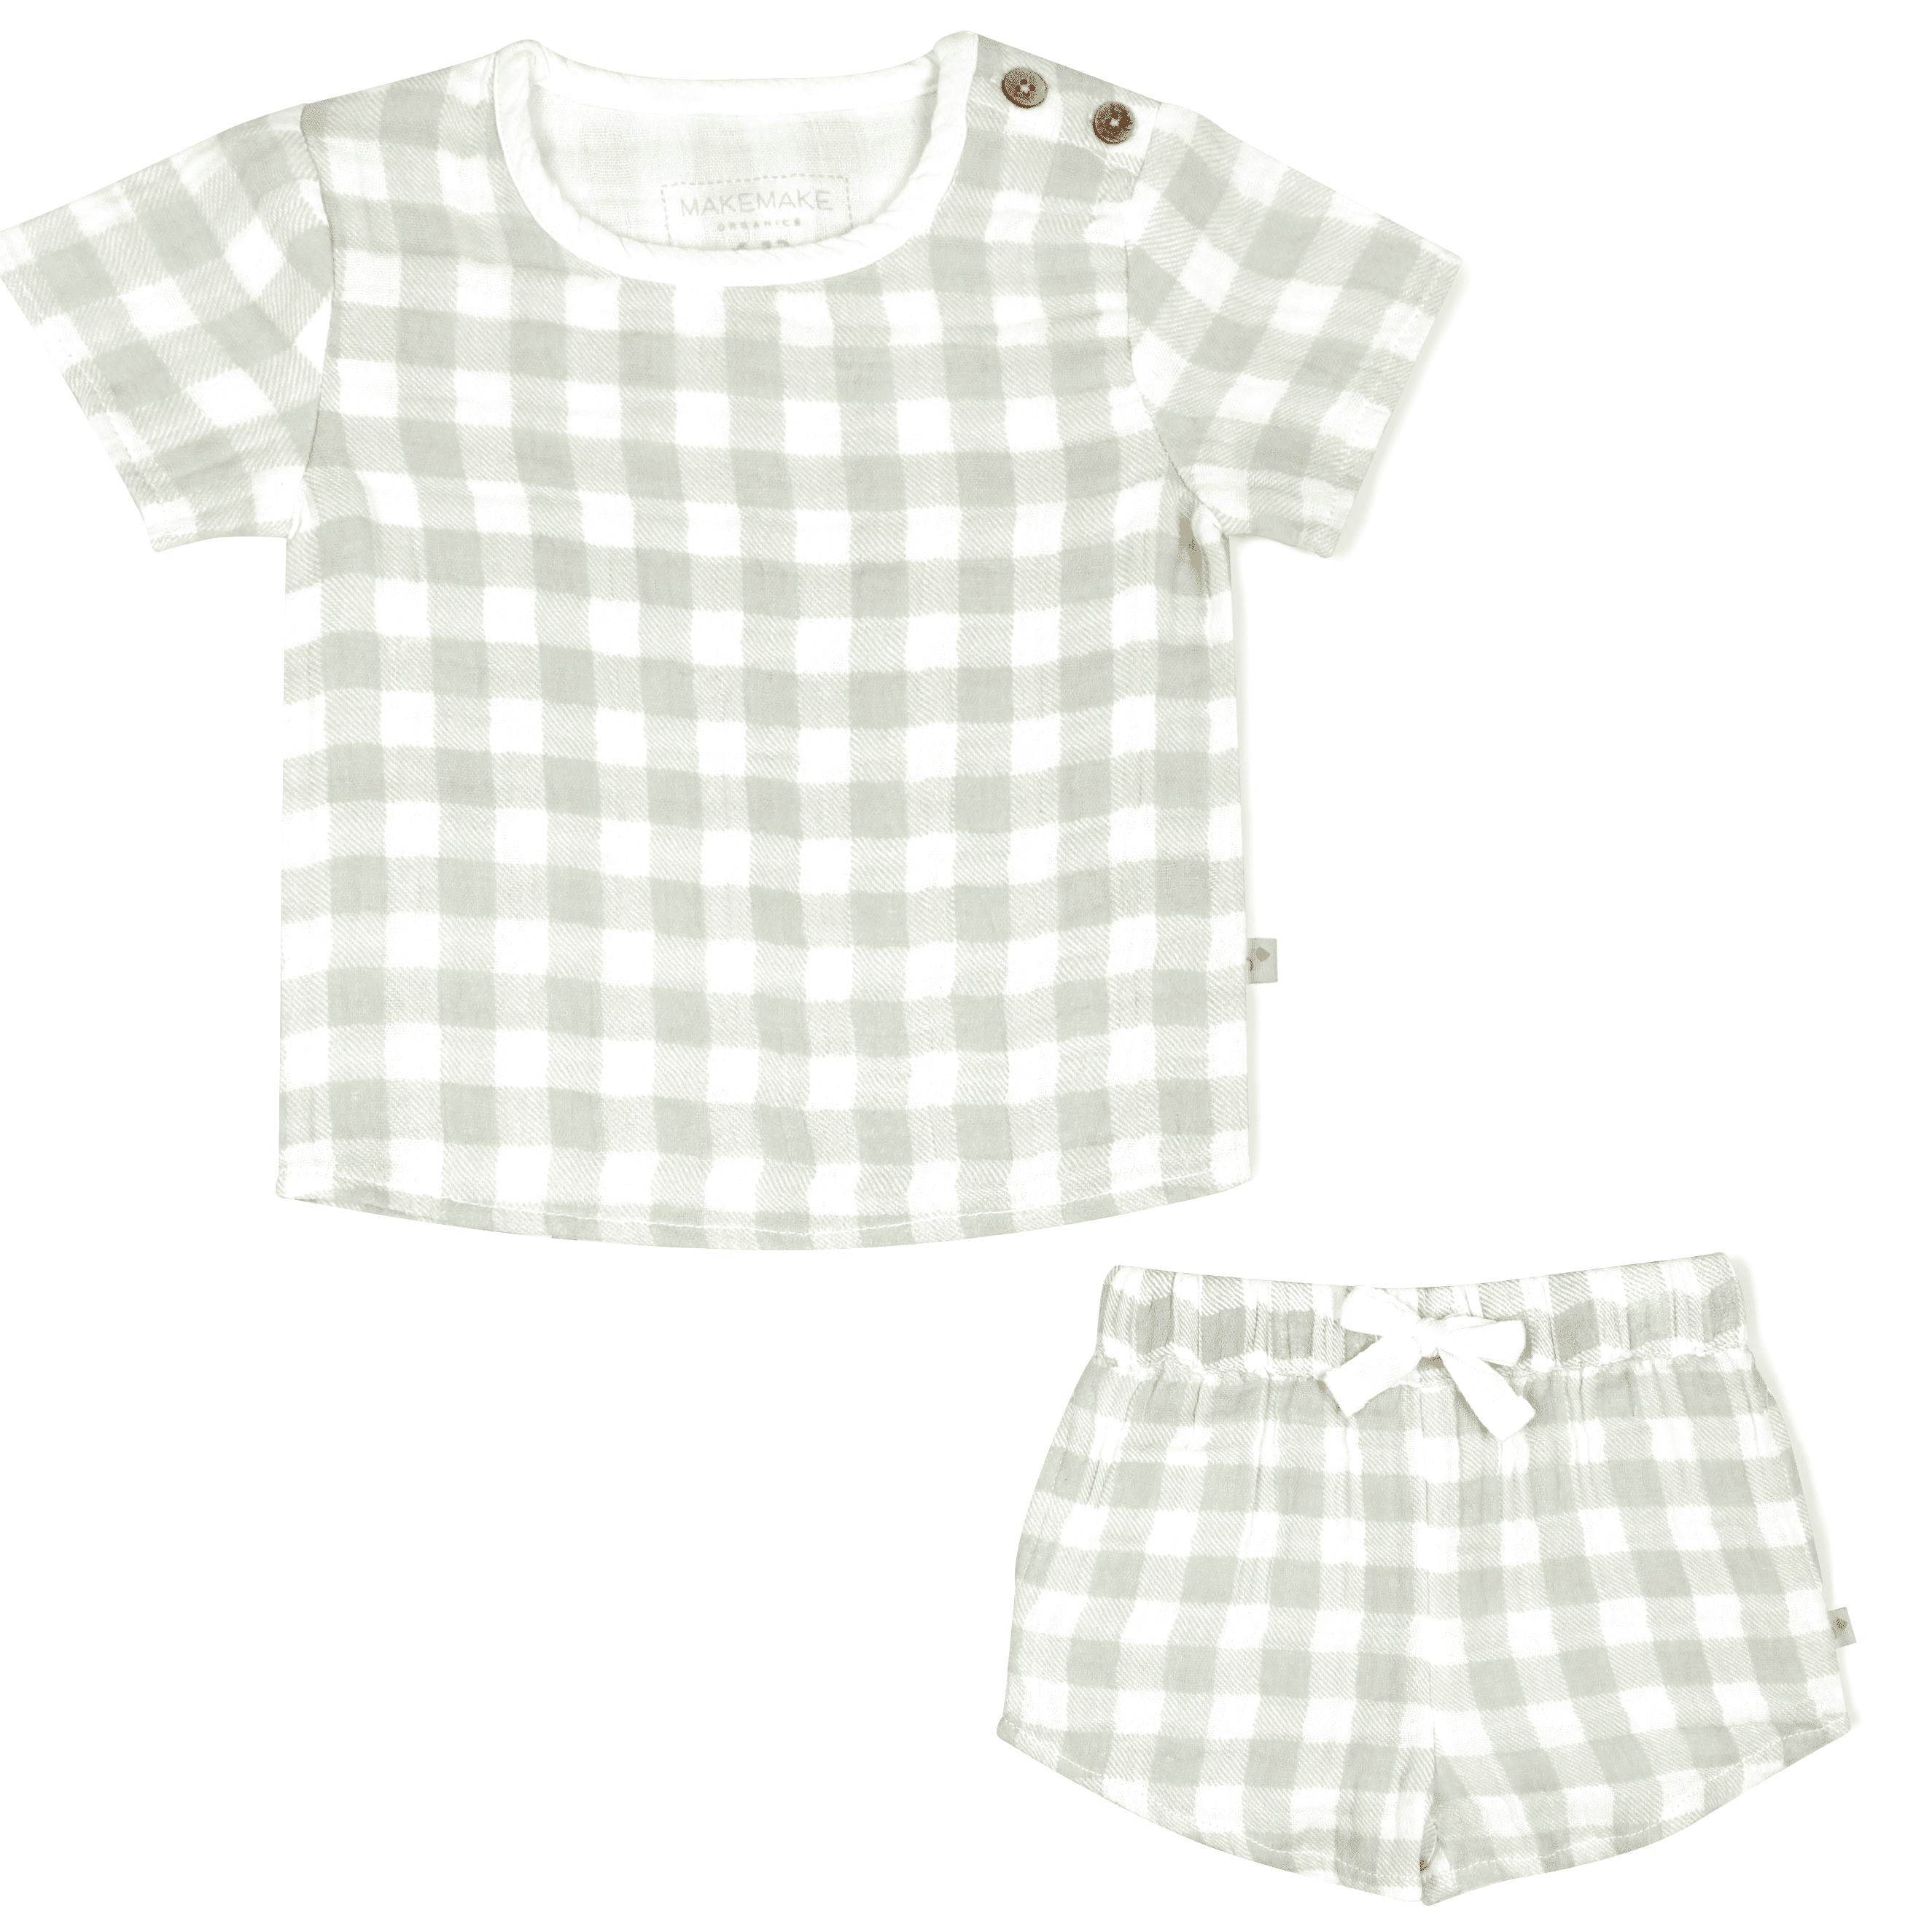 A light green and white gingham patterned toddler outfit consisting of Makemake Organics' Organic Muslin Top and Shorts 2 Piece Set, displayed on a white background.